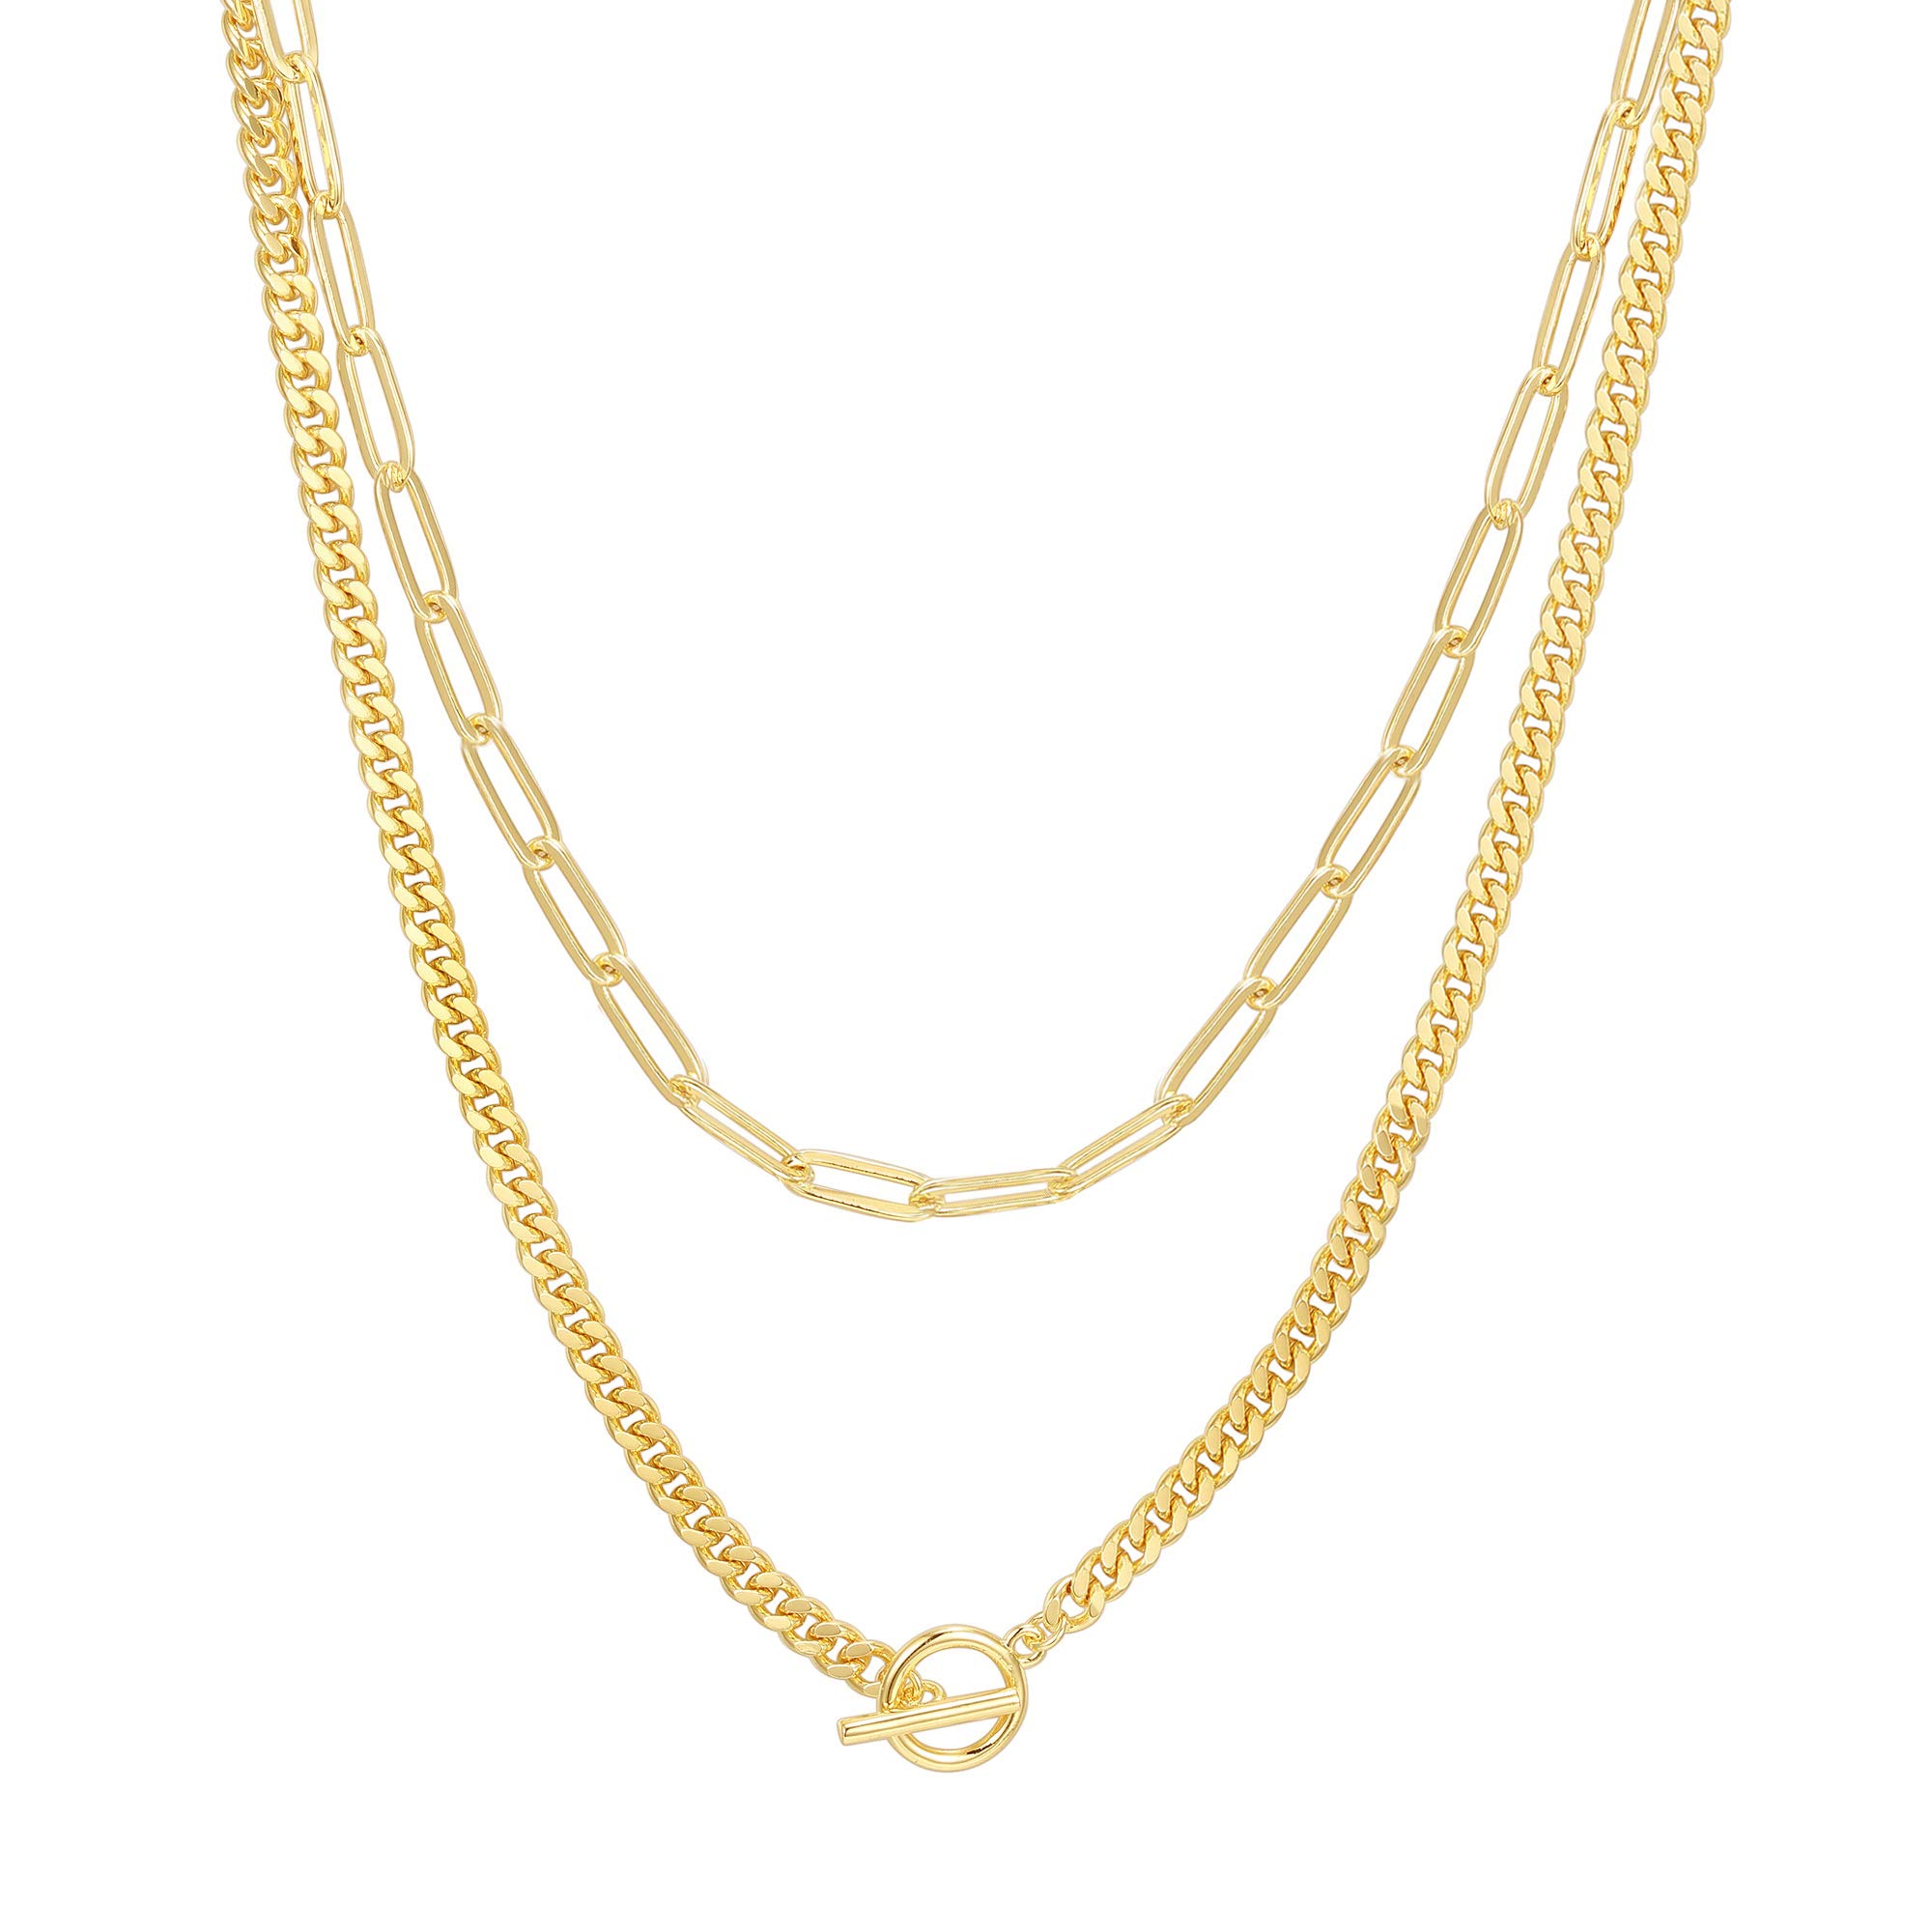 Shop 14K Gold Plated Solitaire Necklaces at PAVOI